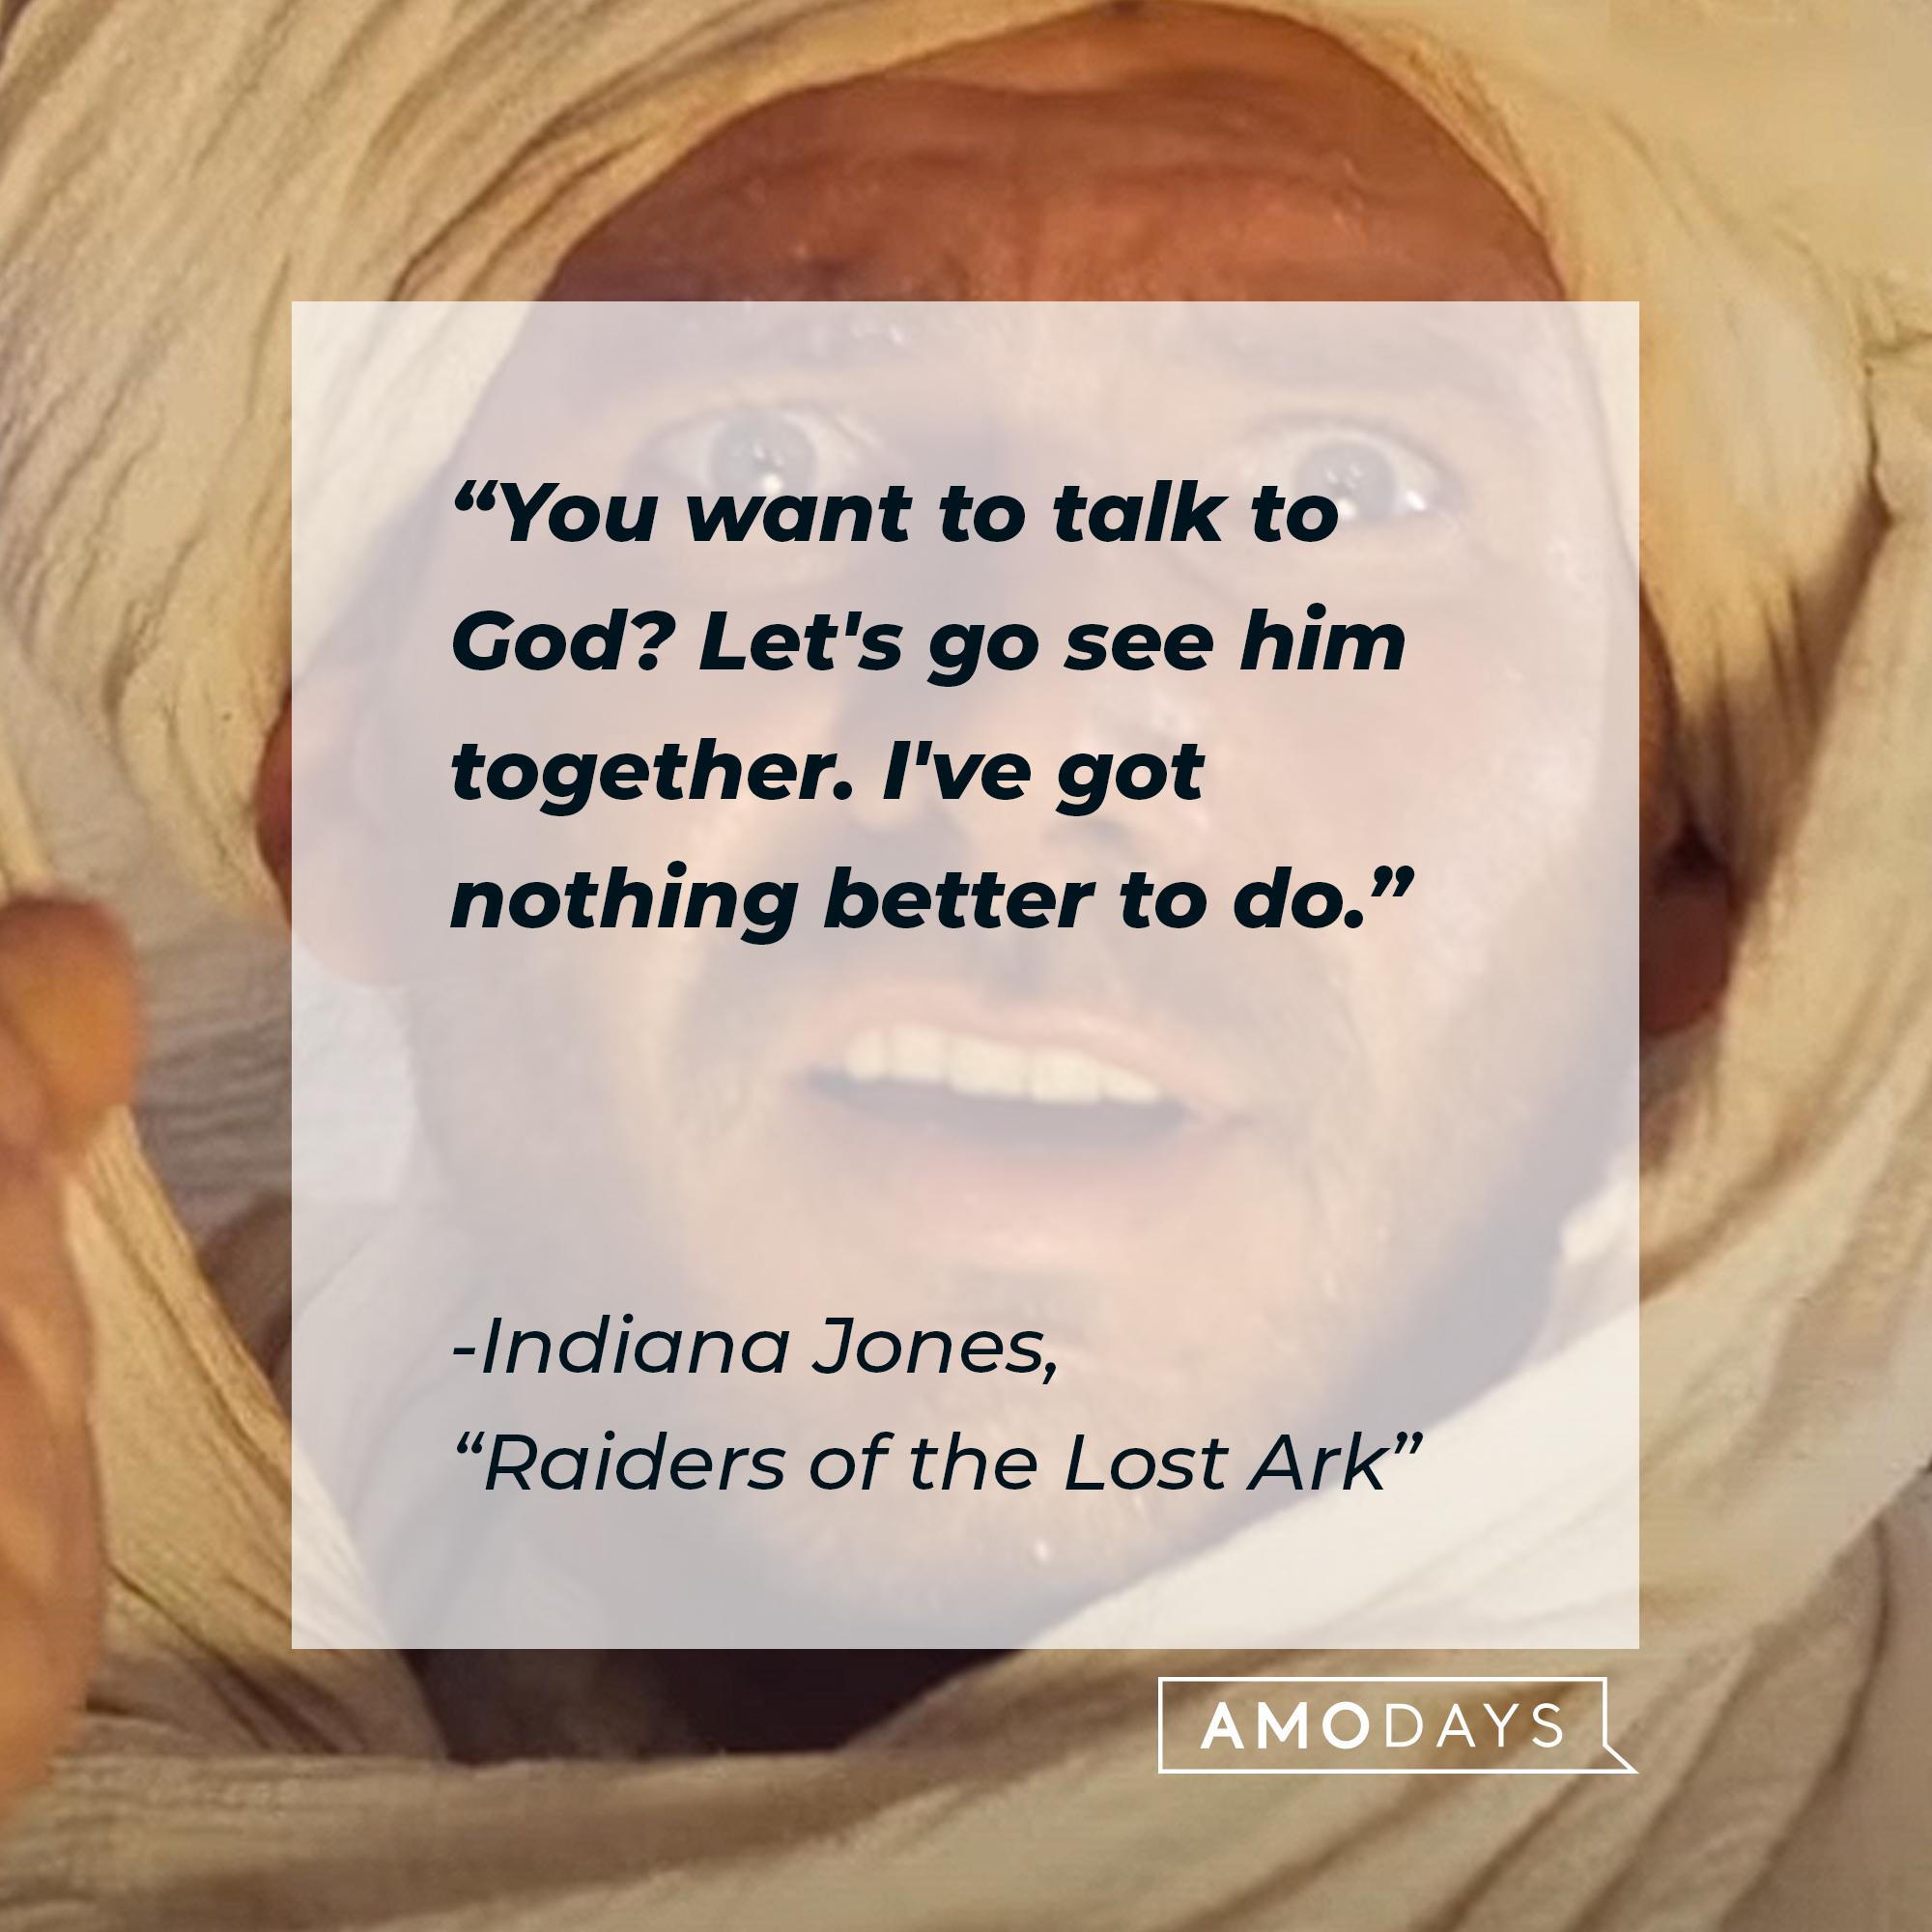 A photo of Indiana Jones with the quote, "You want to talk to God? Let's go see him together. I've got nothing better to do." | Source: YouTube/paramountmovies